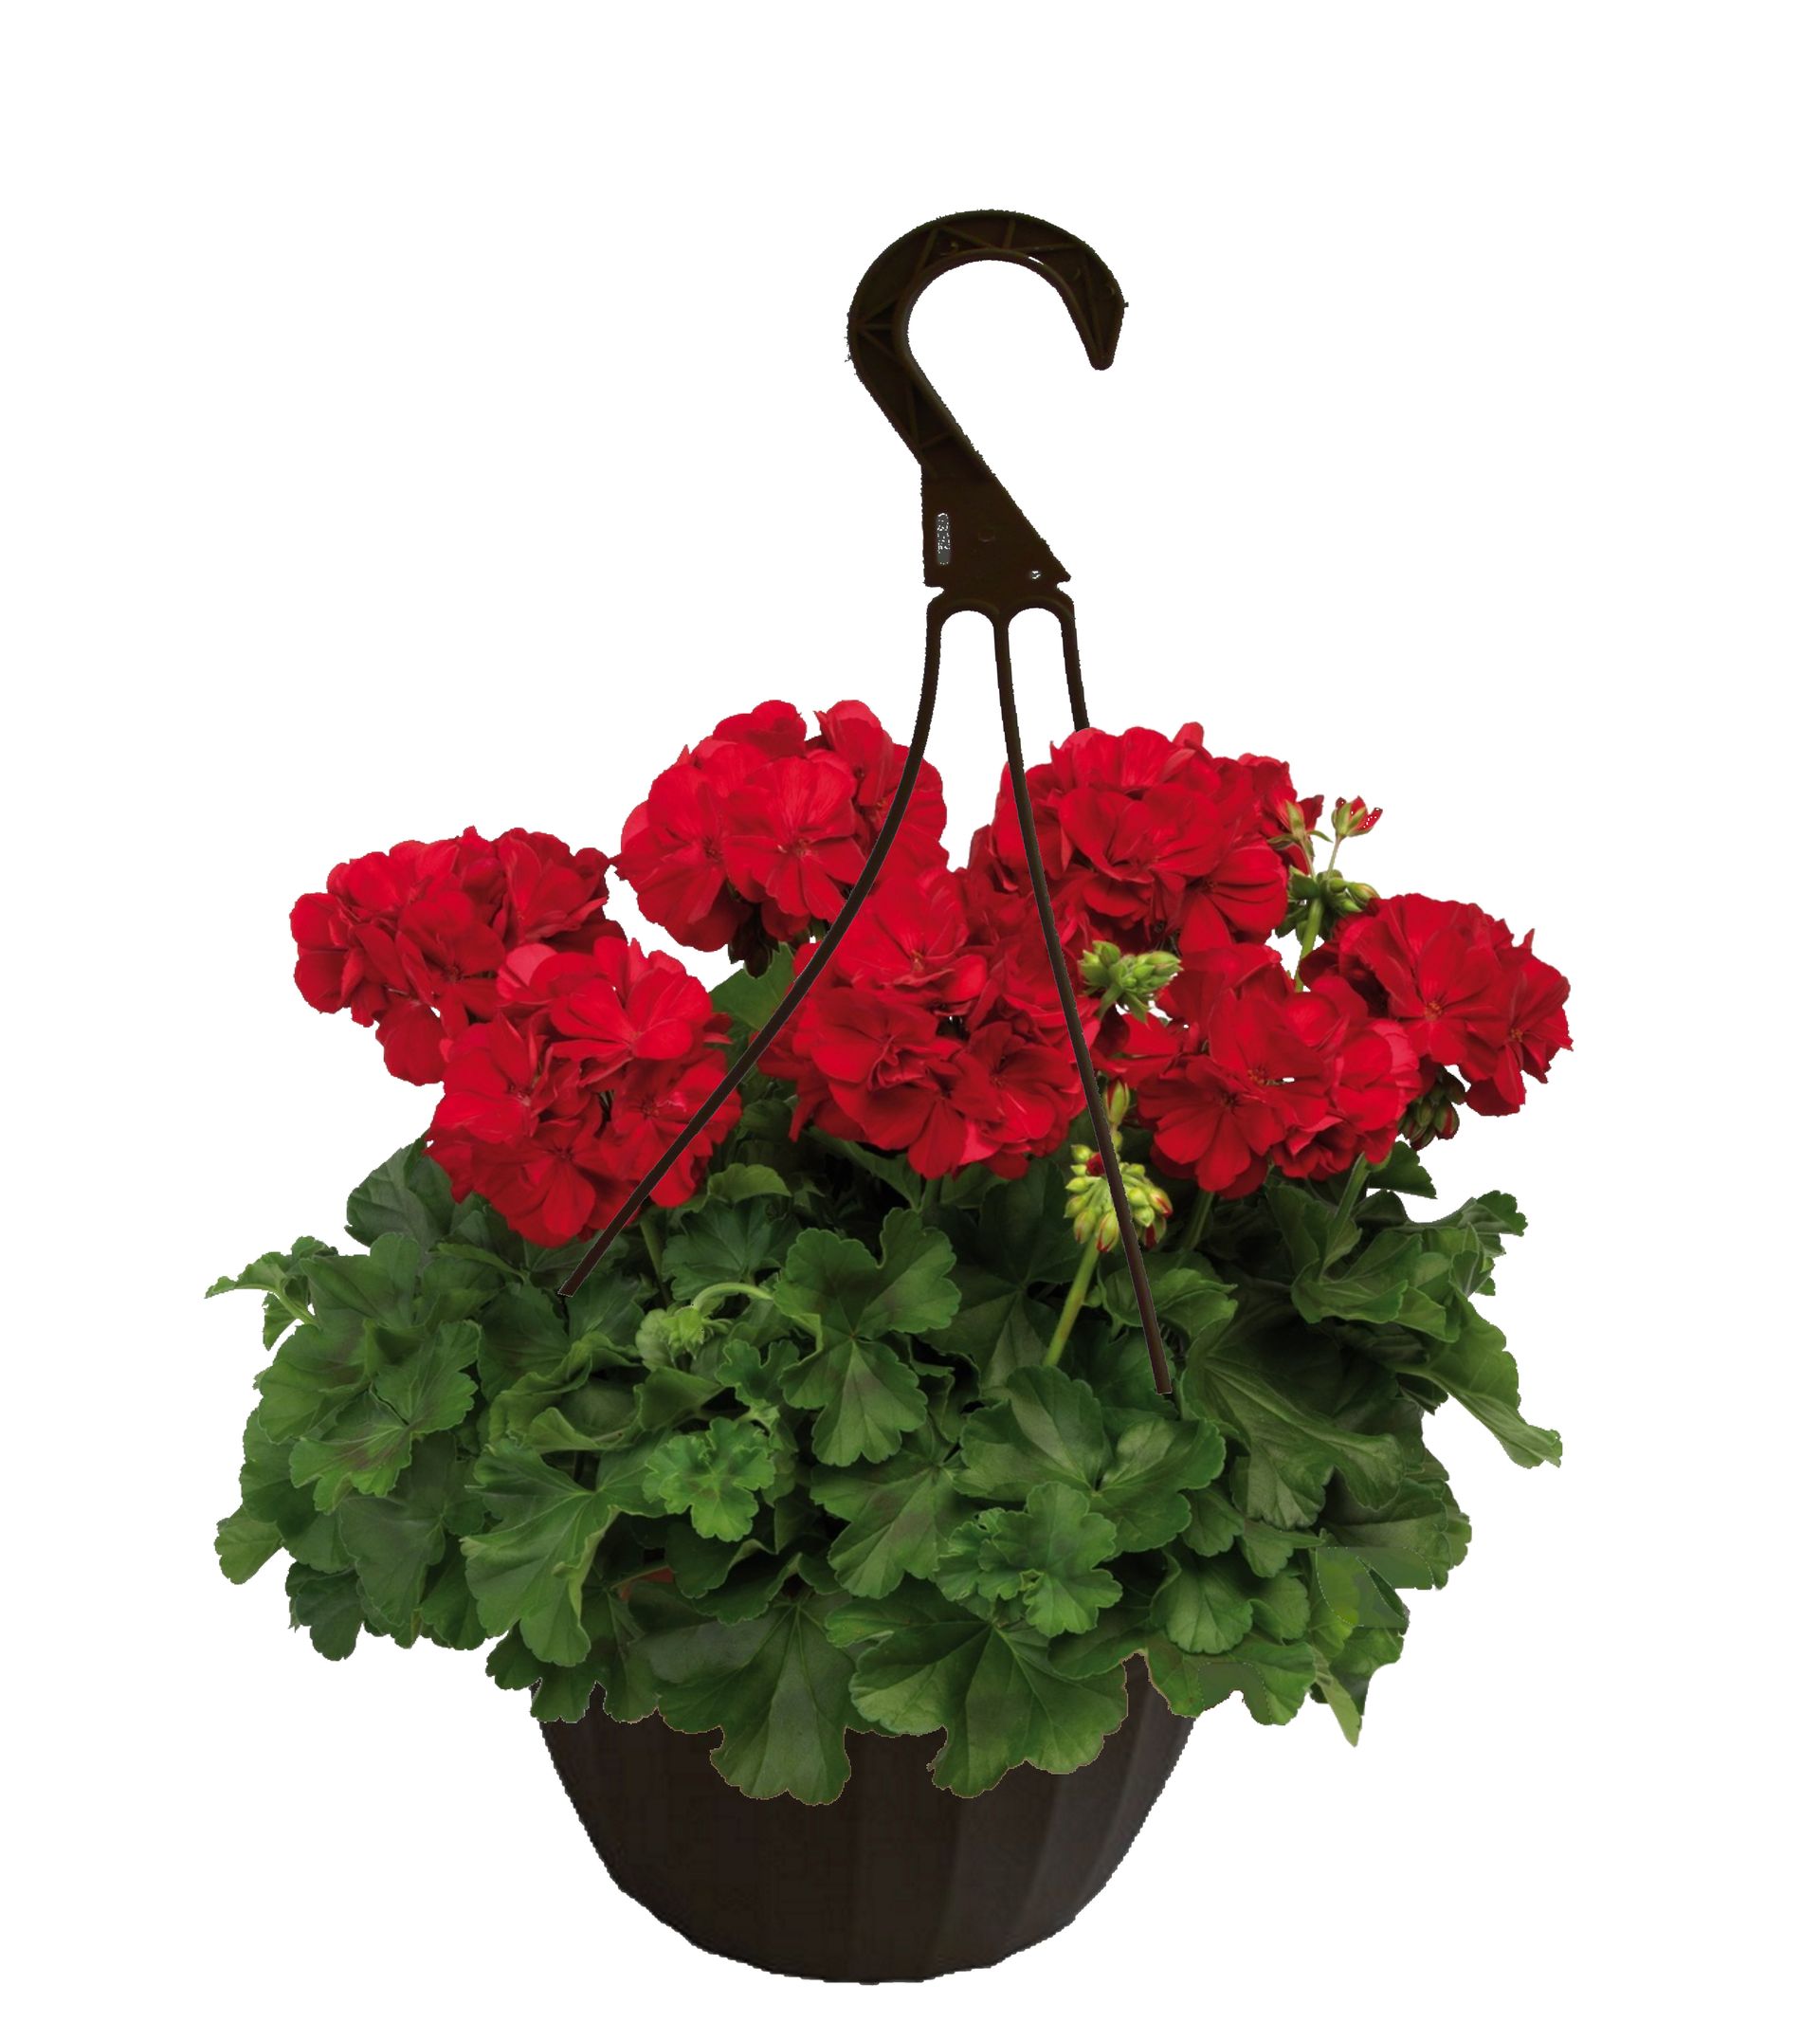 Red Geranium hanging basket flowers for sale in Lebanon PA